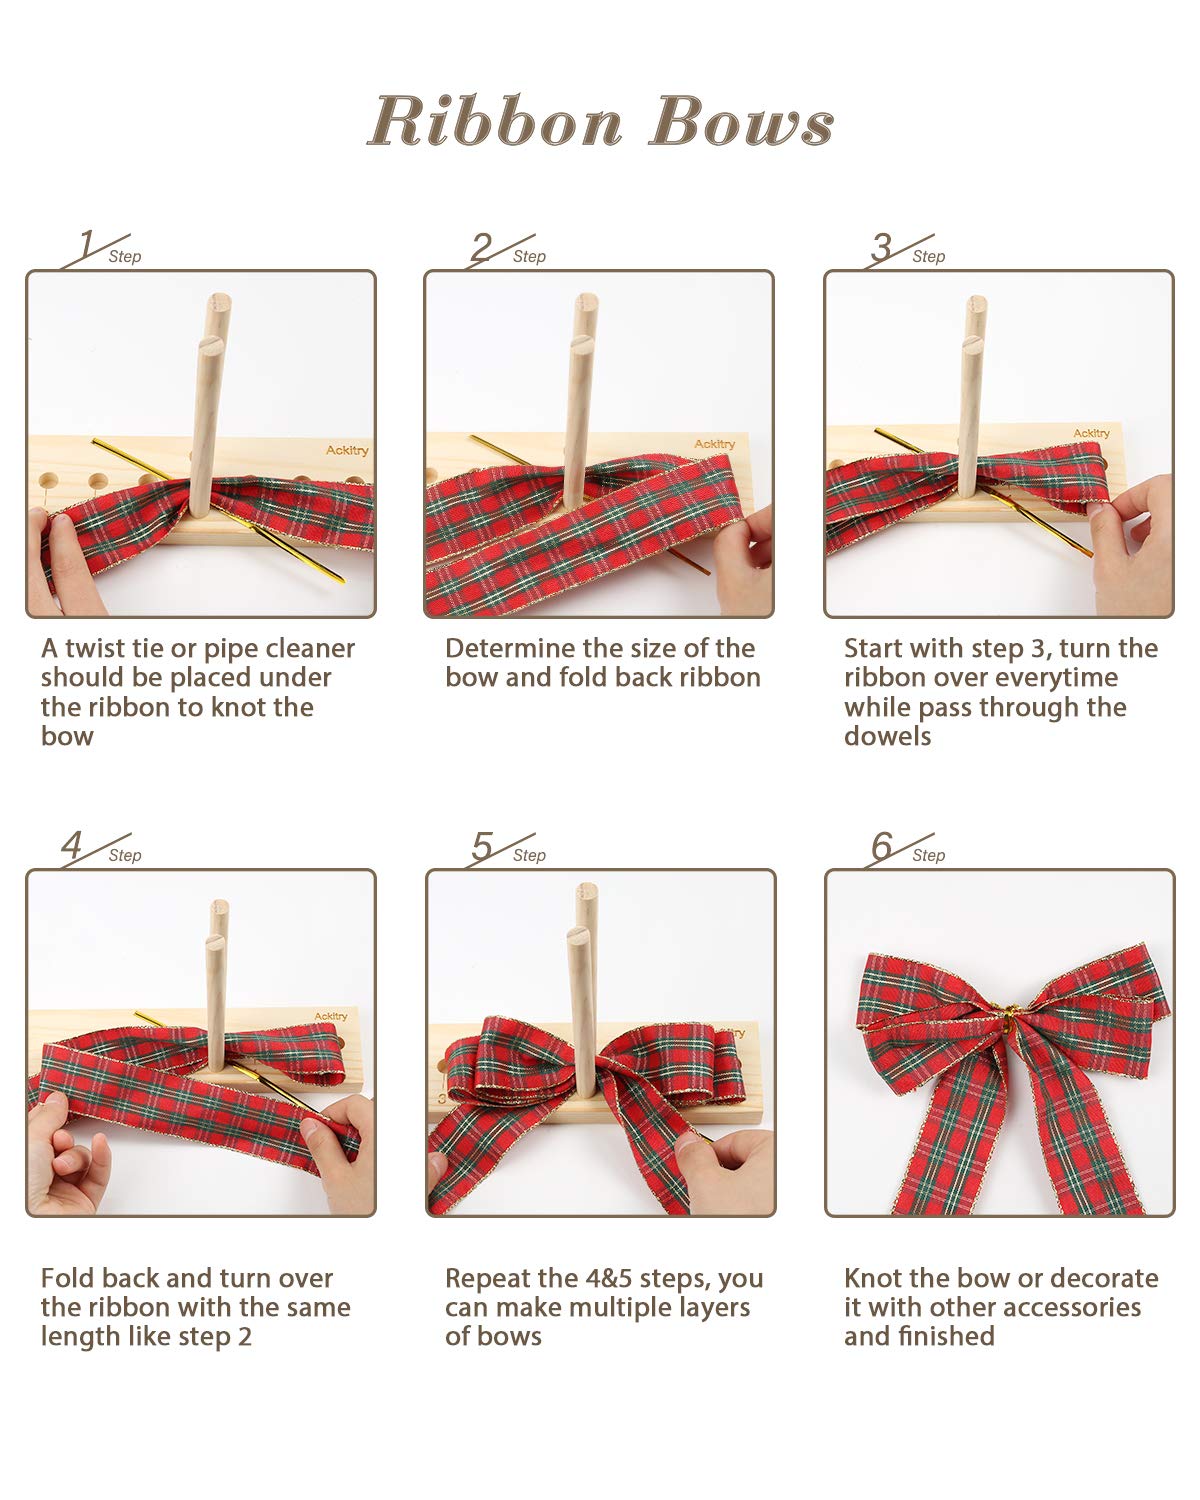 Ackitry Extended Bow Maker for Ribbon for Wreaths, Wooden Ribbon Bow Maker  with Twist Ties and Instructions for Creating Gift Bows, Hair Bows